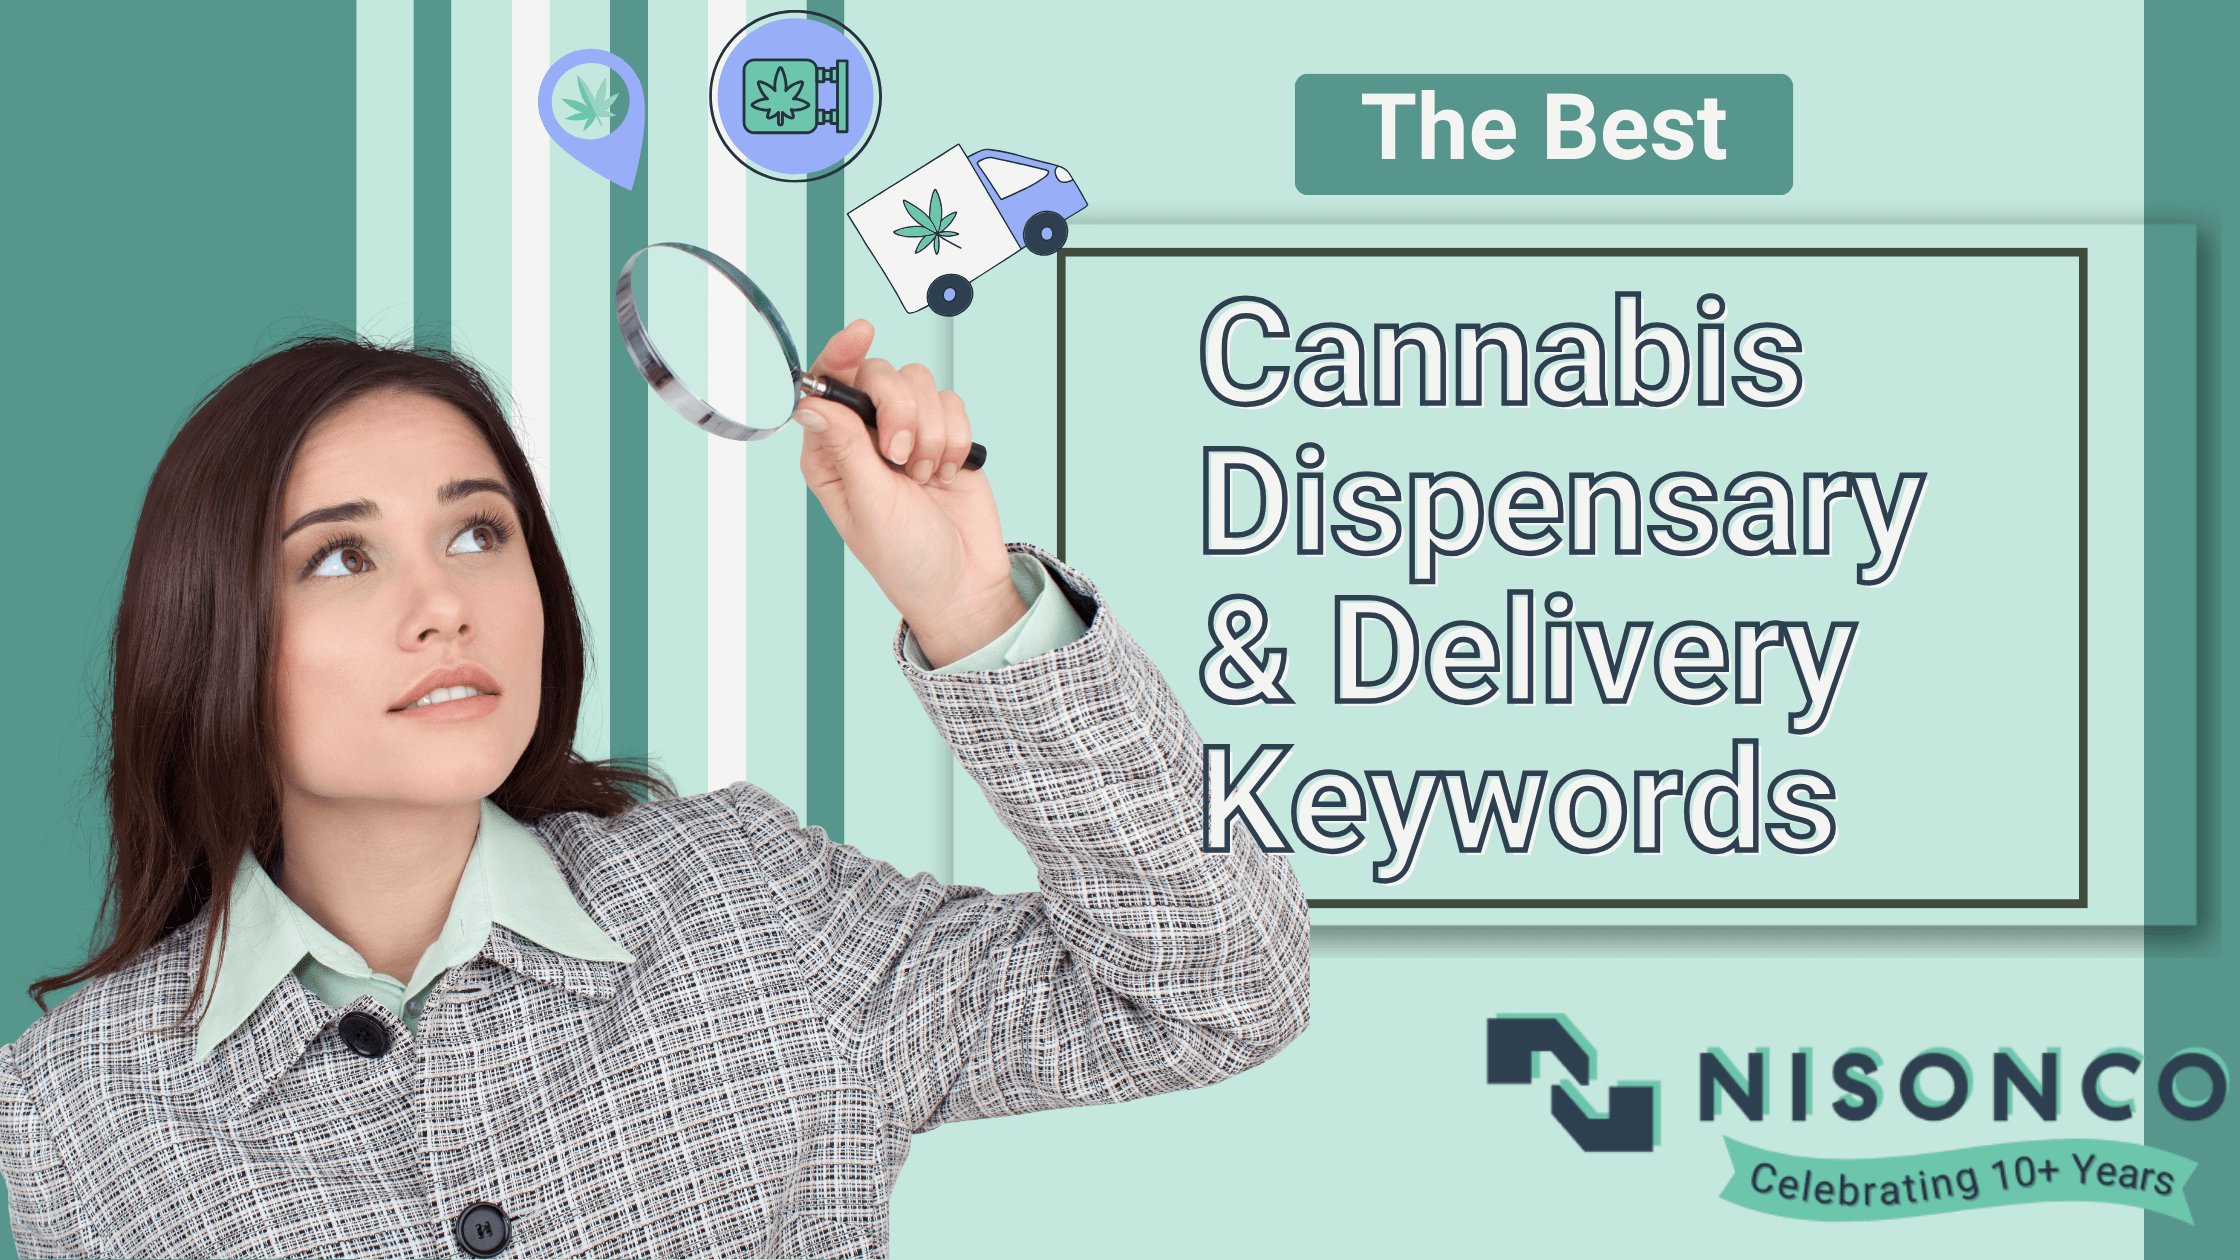 On the right reads, 'The Best Cannabis Dispensary & Delivery Keywords' above the NisonCo banner logo. A woman using a magnifying lens examines icons indicating local SEO for cannabis, cannabis delivery and dispensaries is on the left.